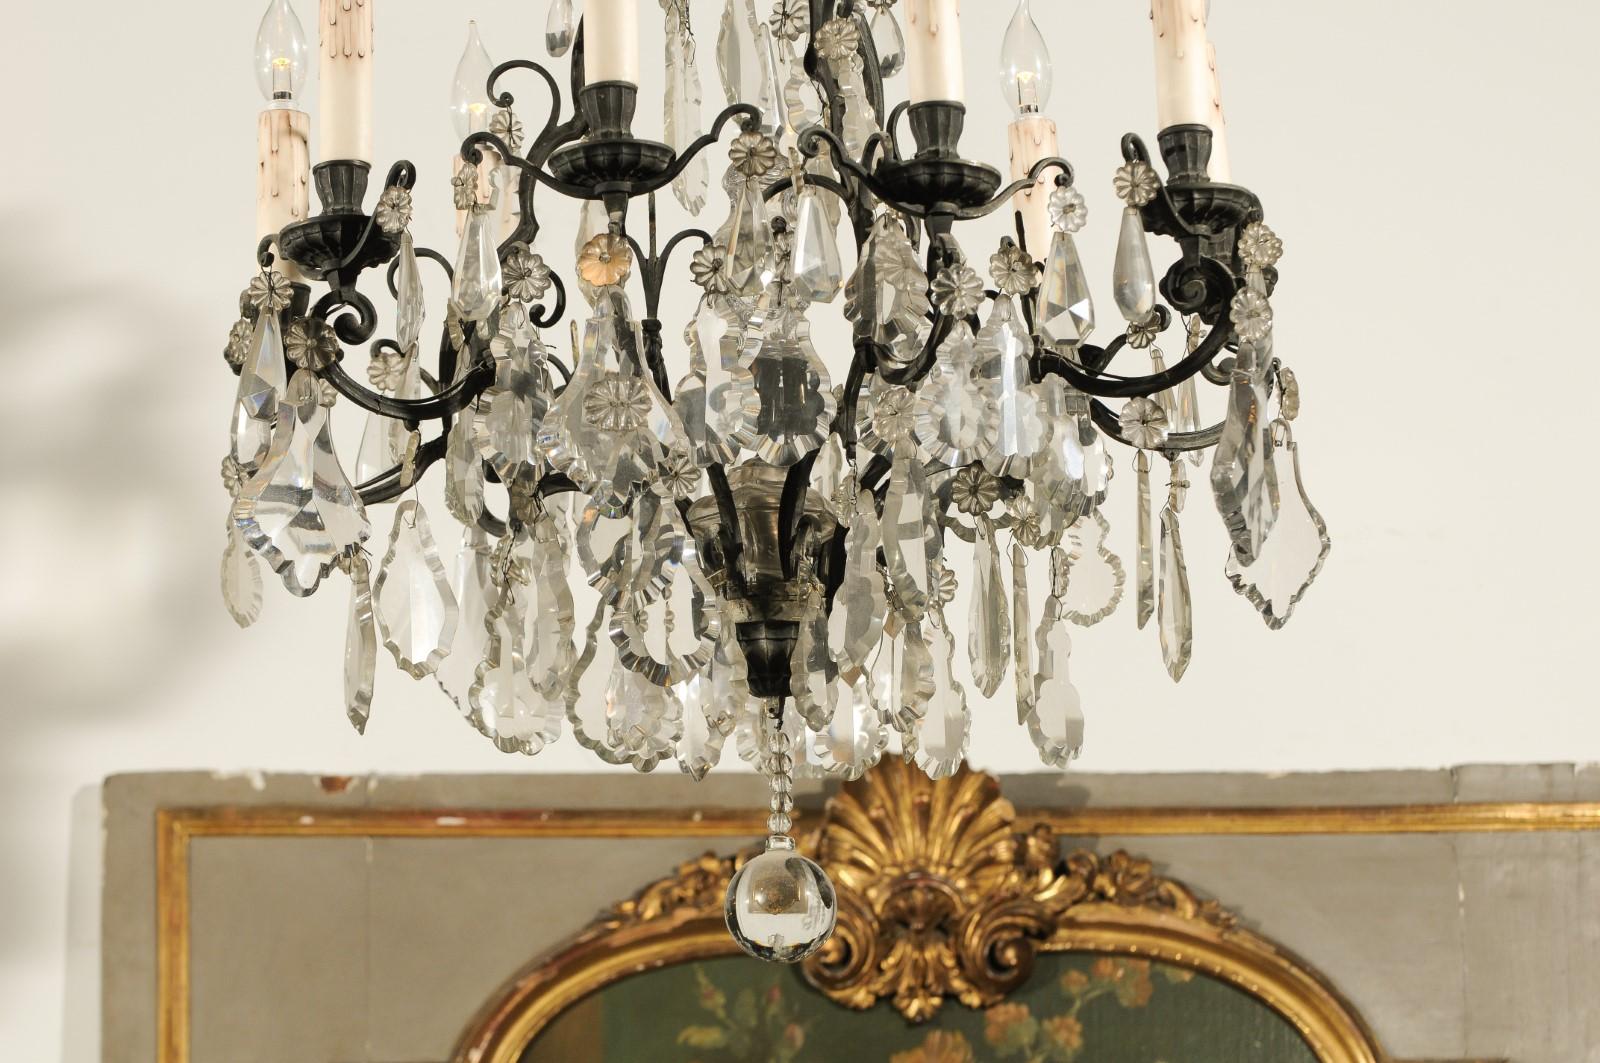 19th Century French Nine-Light Crystal Chandelier with Iron Scrolling Armature, circa 1890